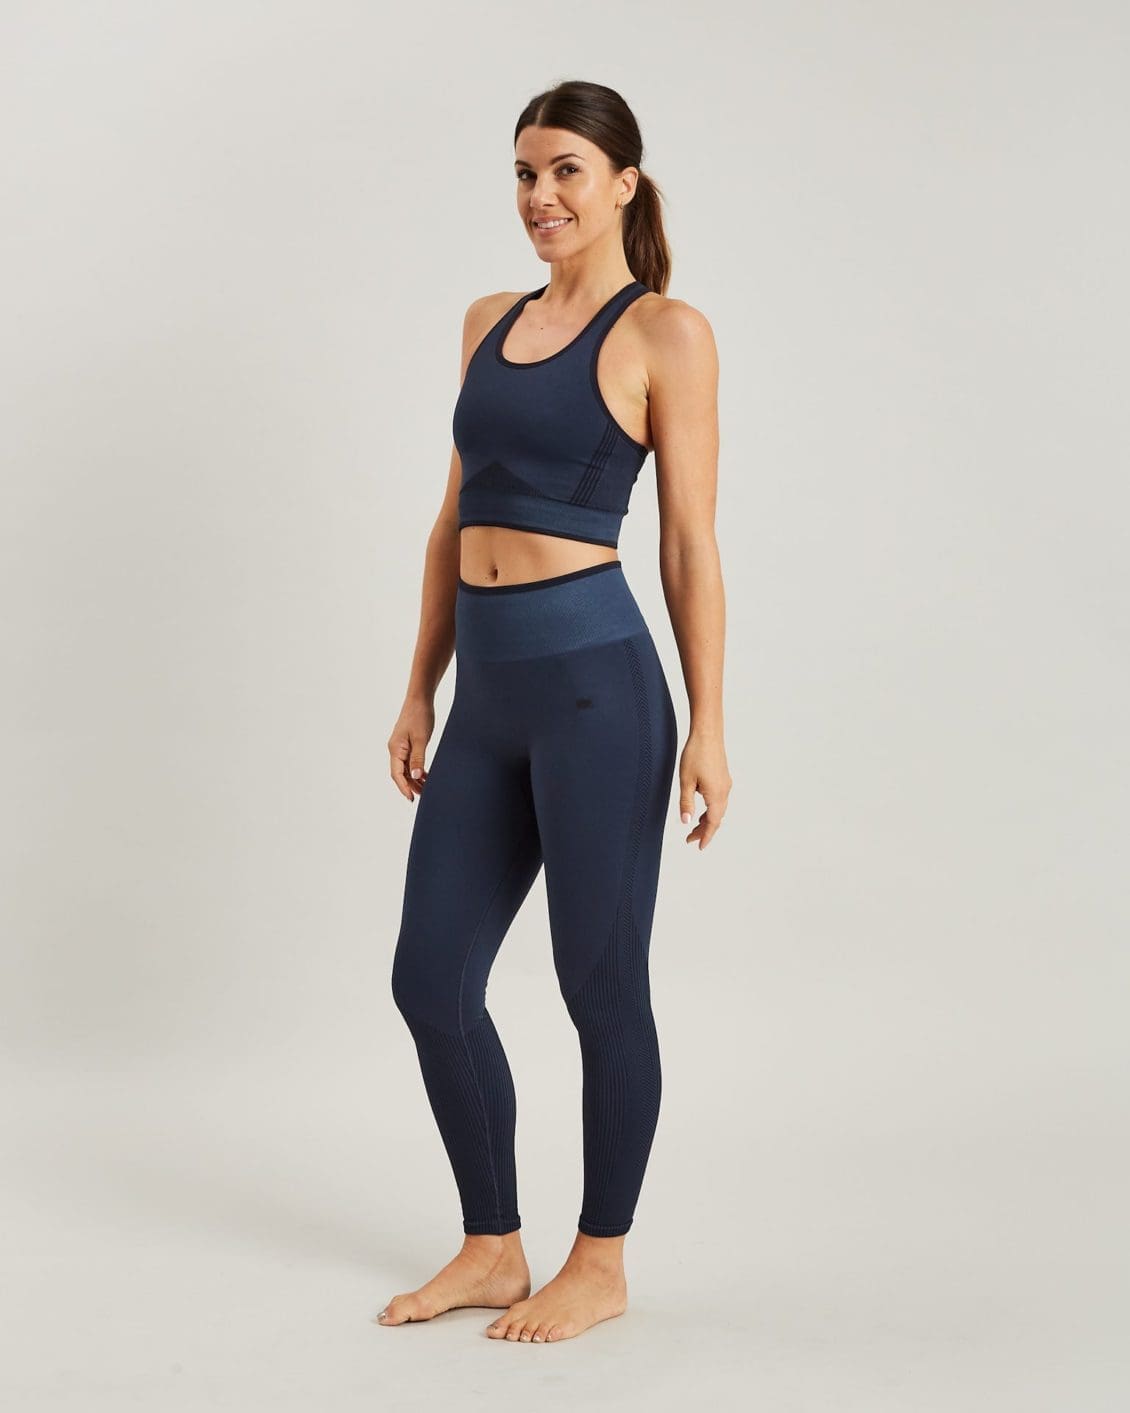 Energy trinity longline bra (to be paired with Energy seamless pocket